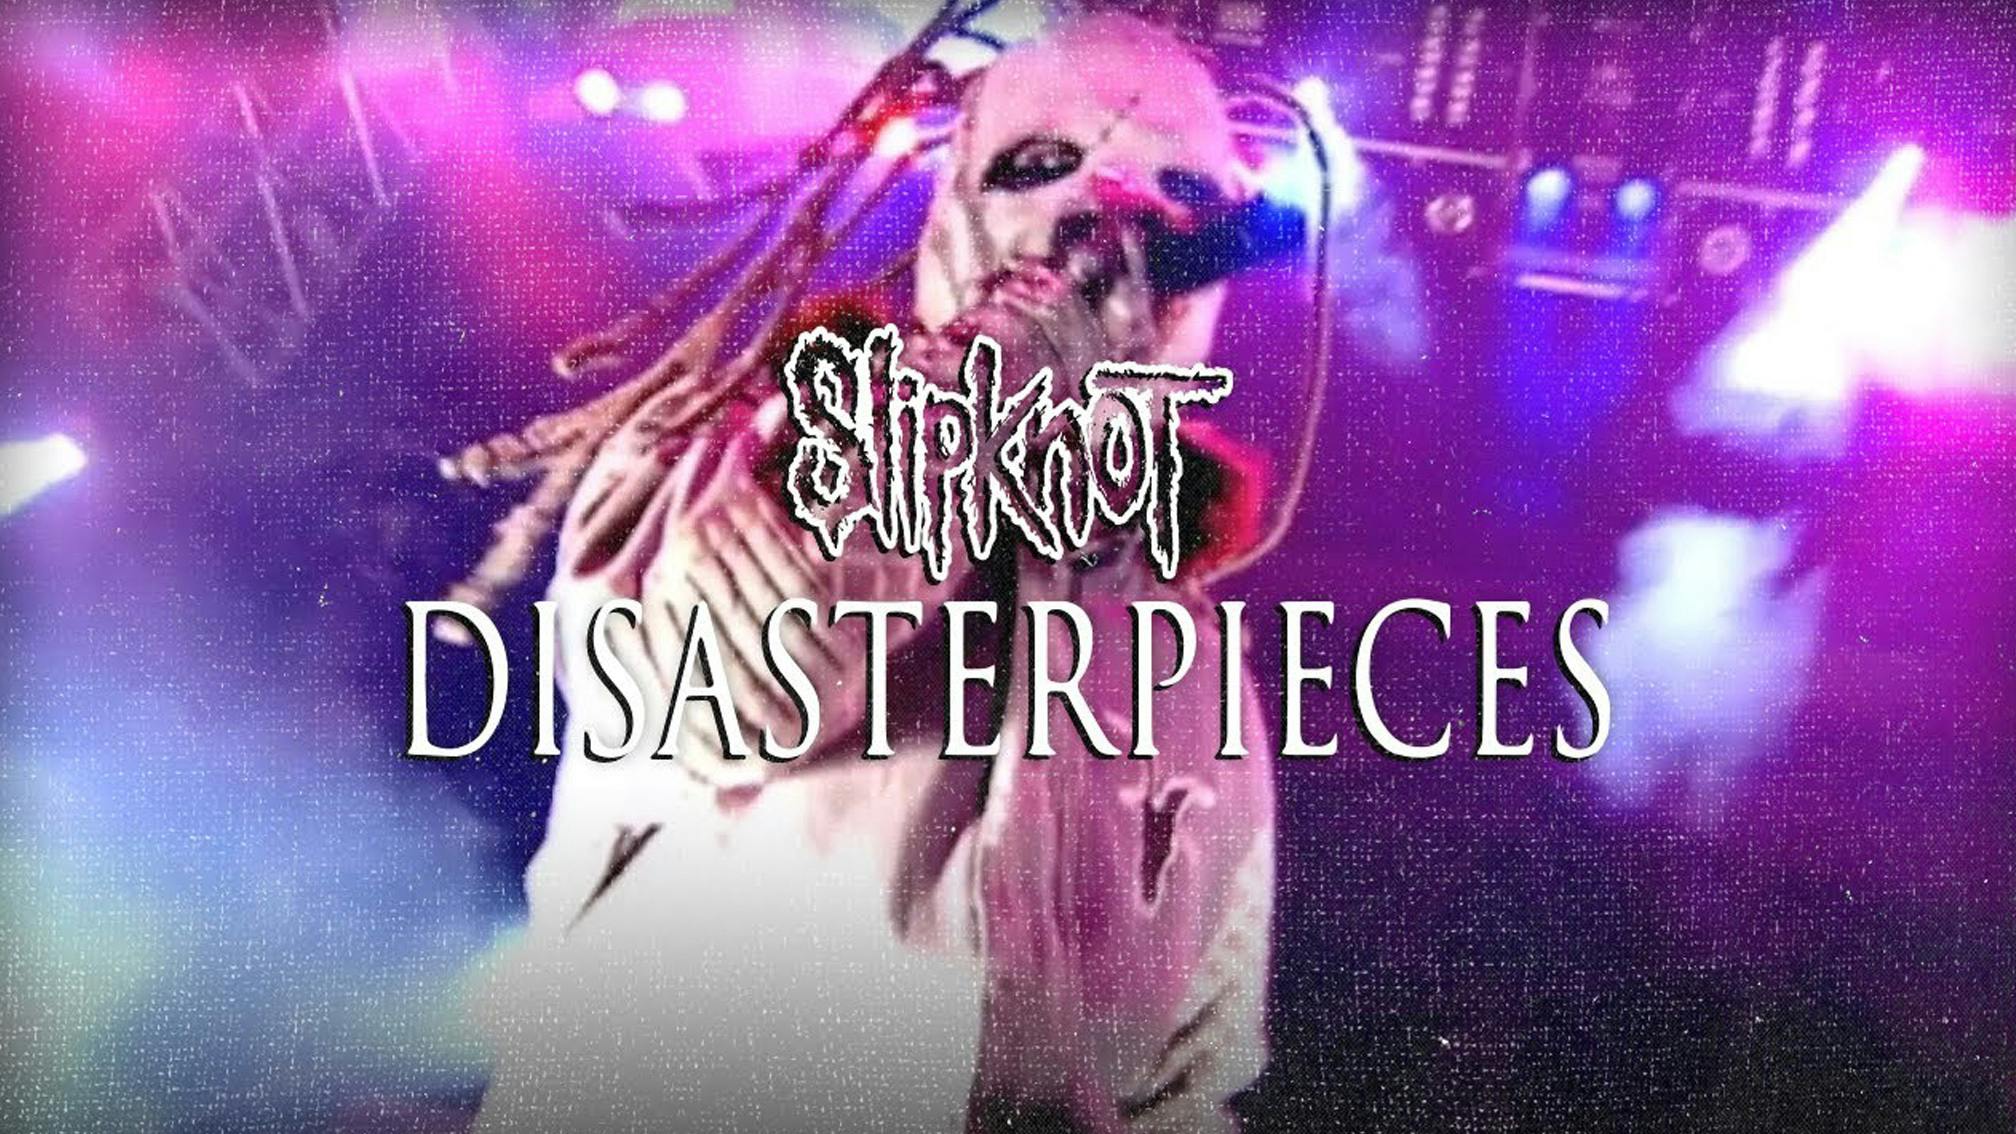 Slipknot's 2002 DVD Disasterpieces Is Now Available To Watch On YouTube